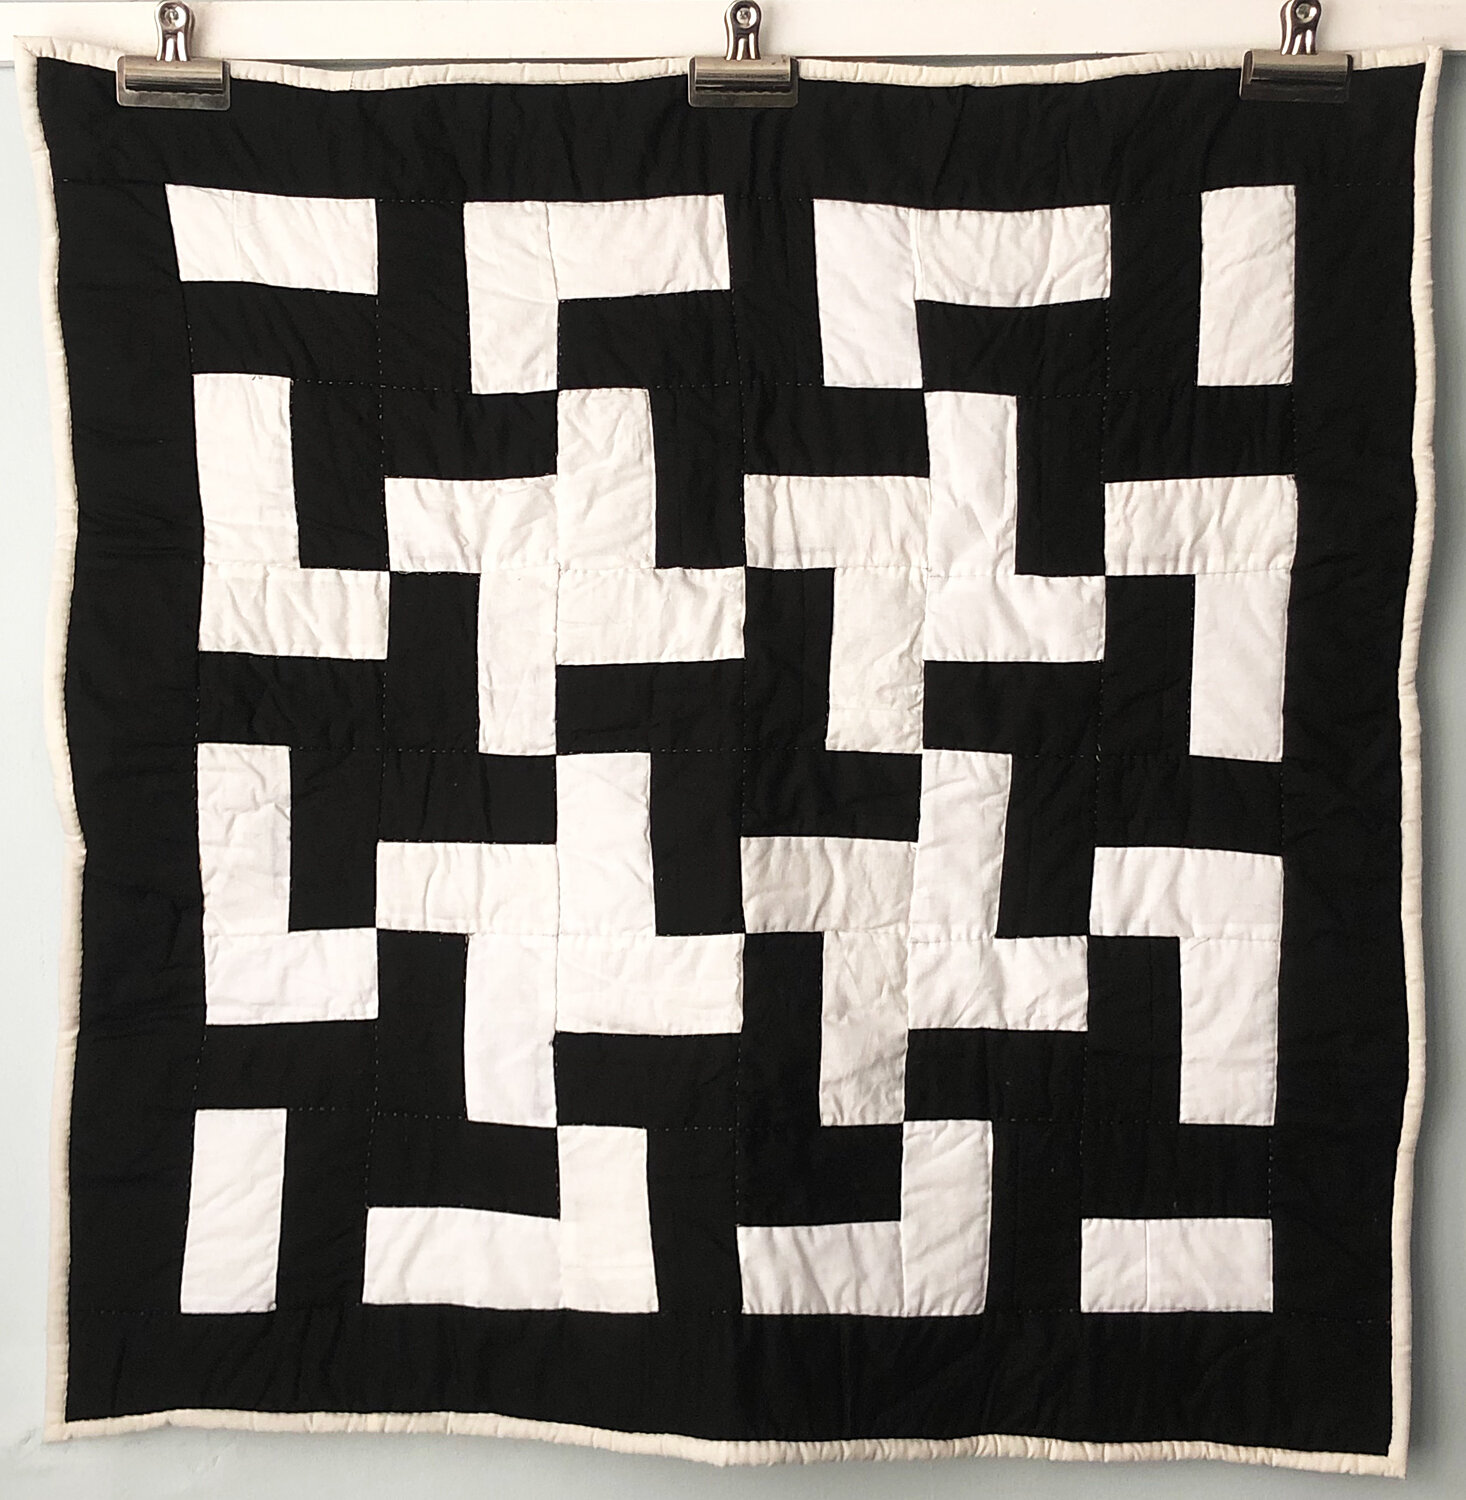   Mary Margaret Pettway (Gee’s Bend, AL)    “Two-strip” quilt   ca. 2019  37" x 37"  Cotton fabrics  Hand-pieced, hand-quilted    ASK ABOUT THIS QUILT   